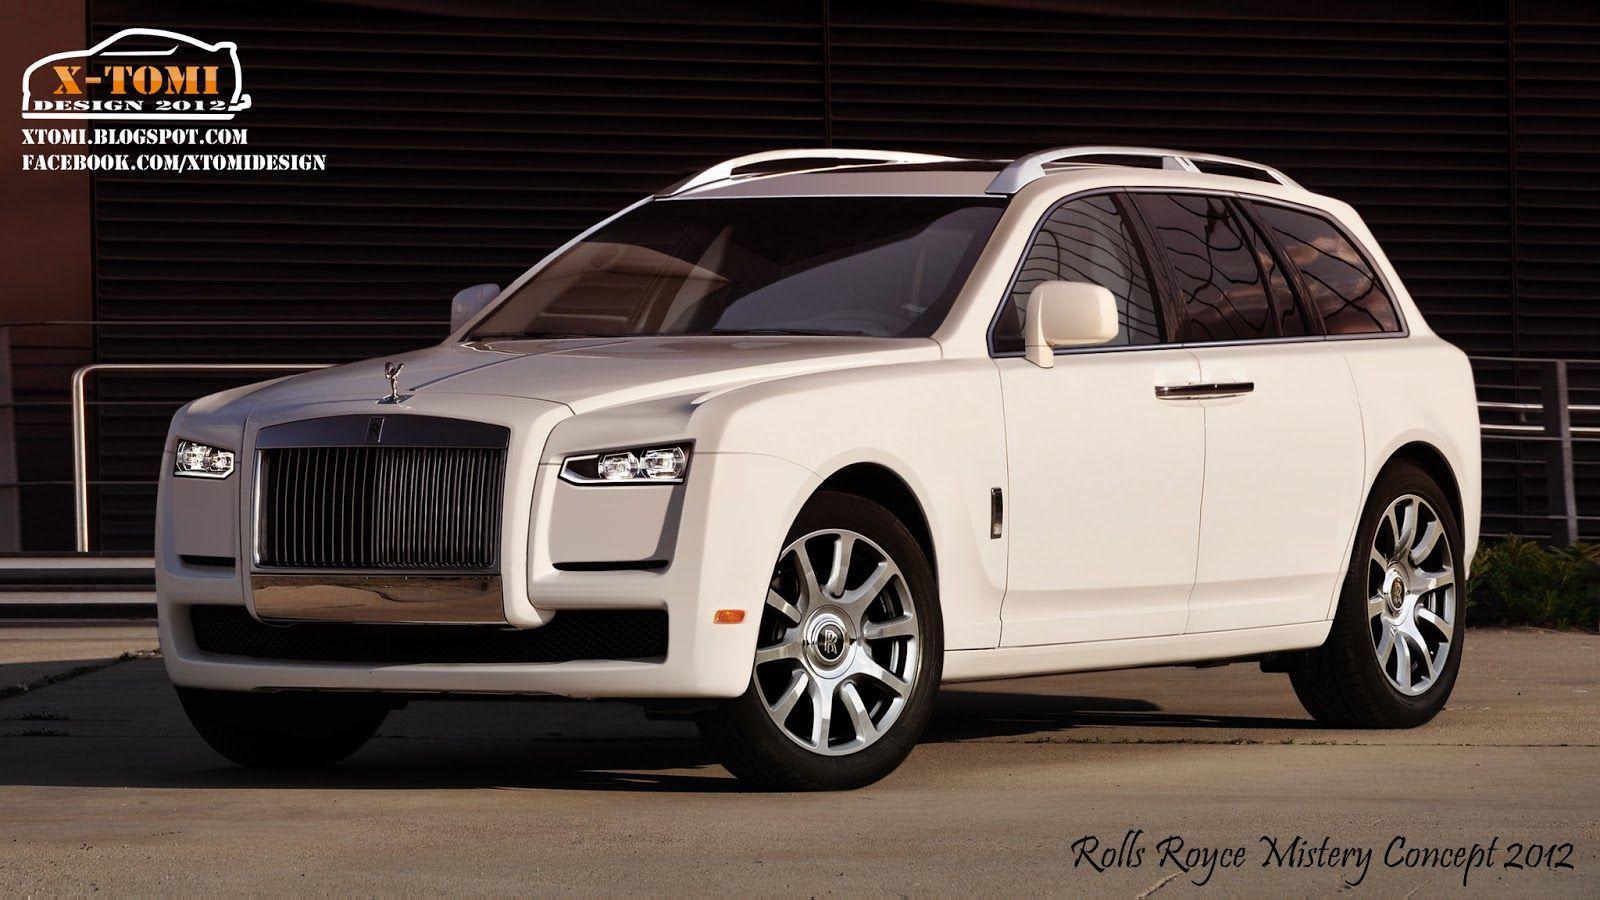 if this went into production, i would buy it. ROLLS ROYCE